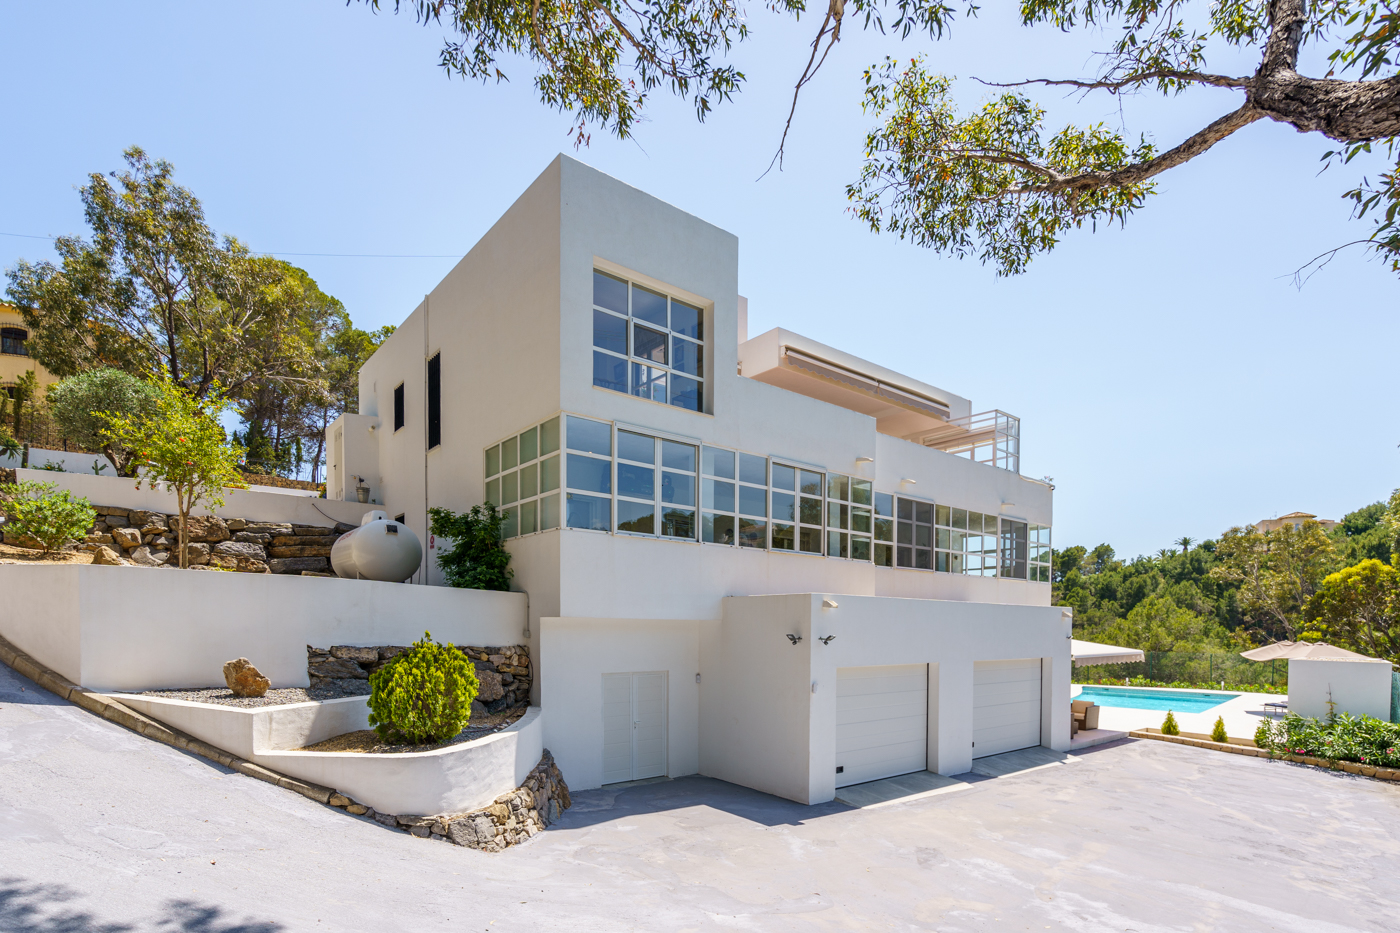 FANTASTIC VILLA IN THE HEART OF THE DON CAYO GOLF COUNTRYCLUB.